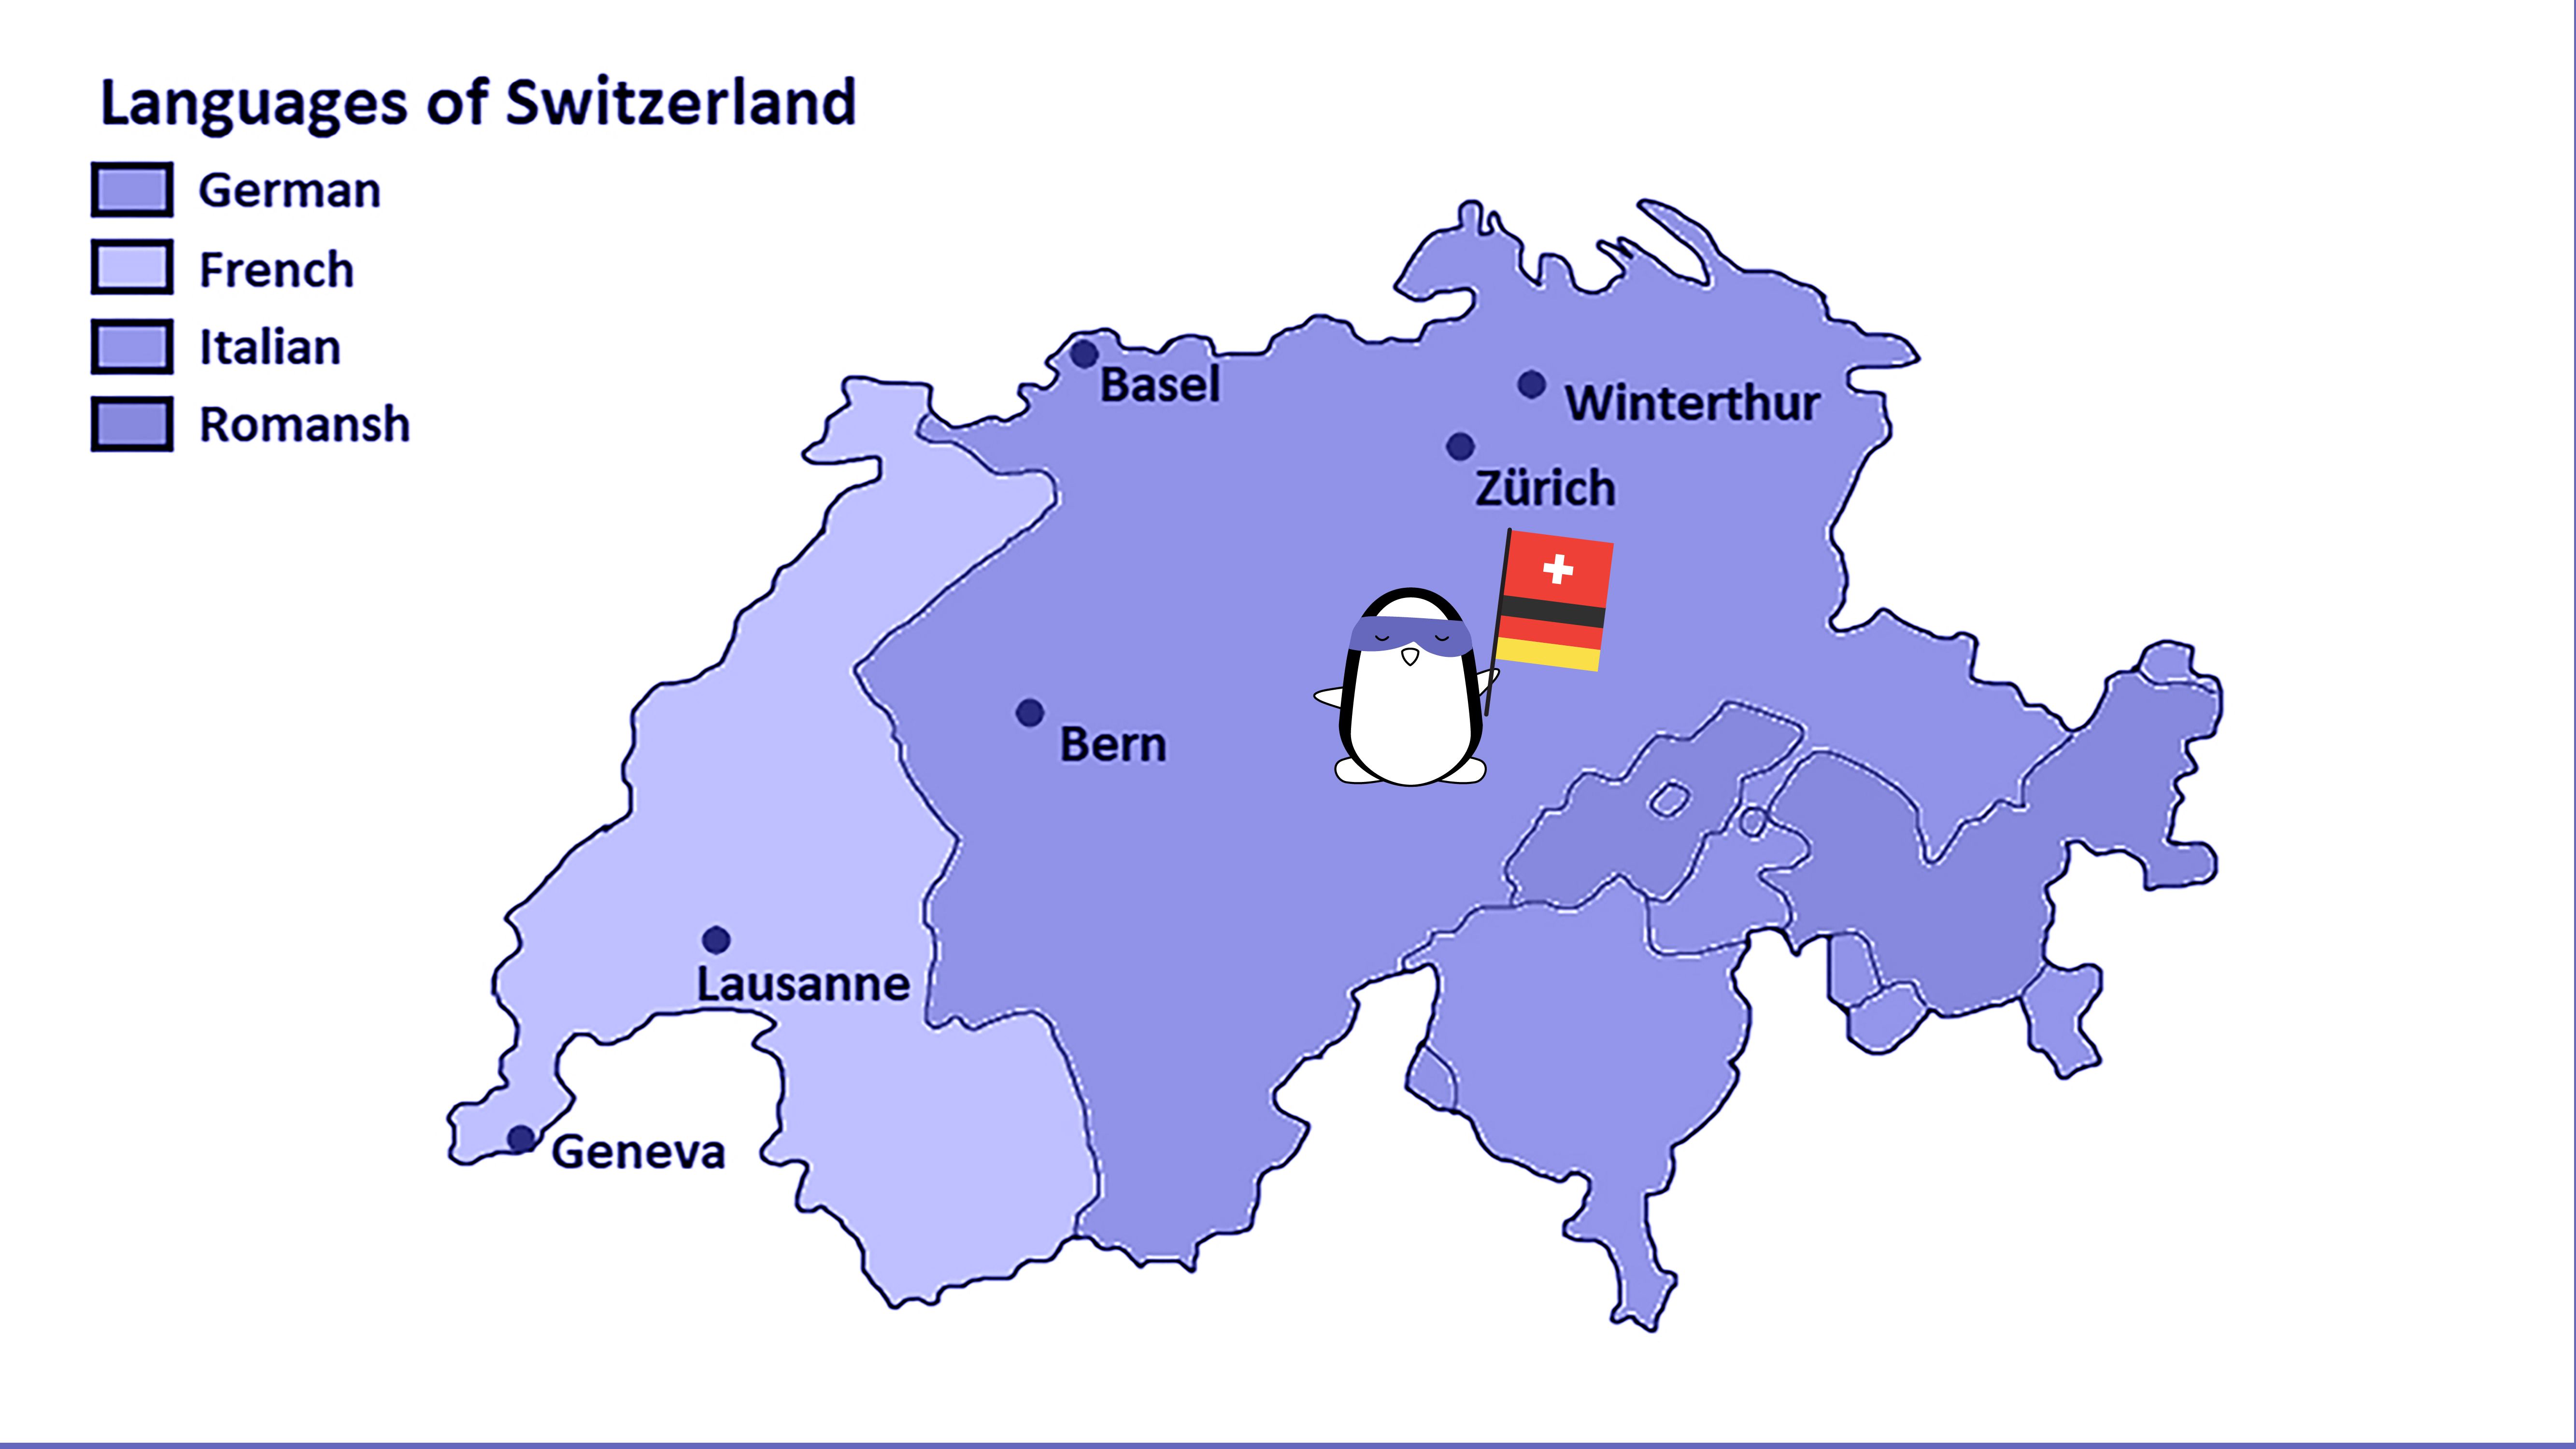 On the map, Pocky is somewhere under Zurich, holding the flag that is a mix of German and Swiss flags.